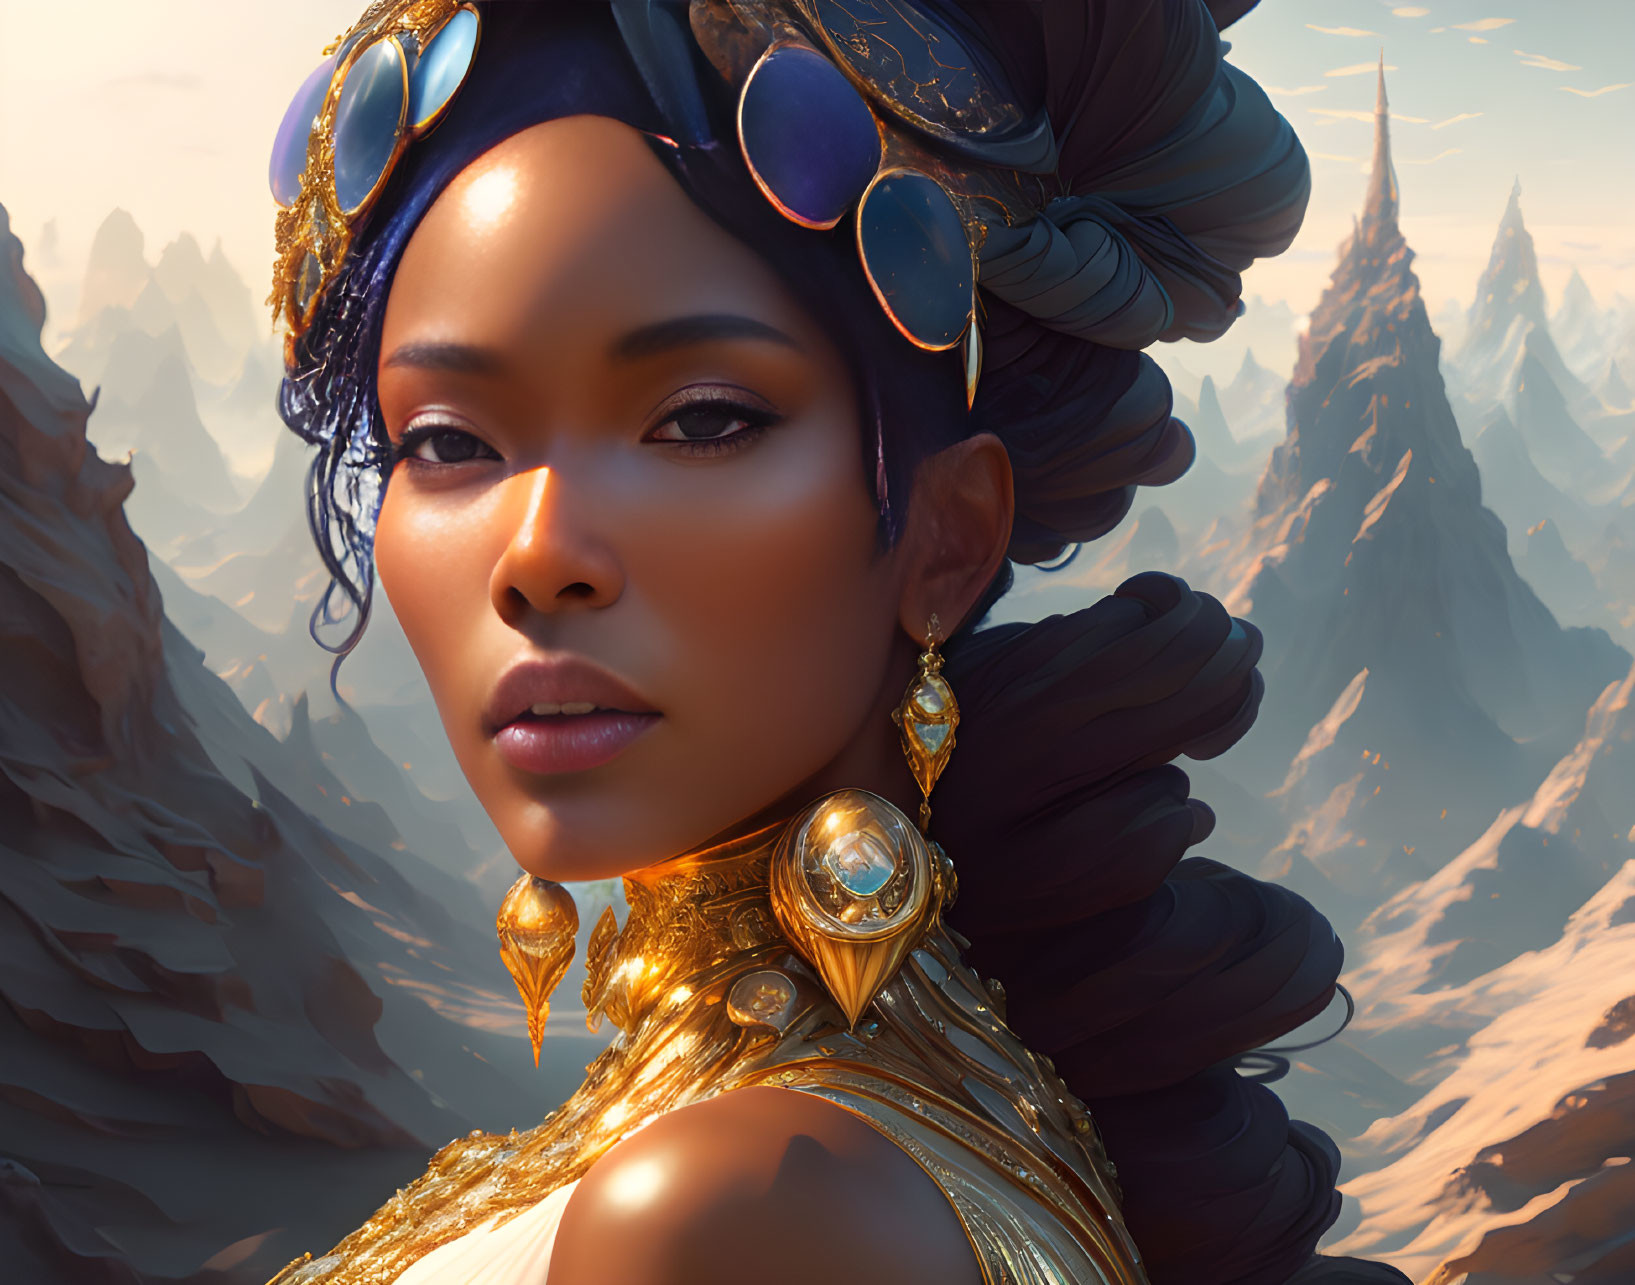 Regal woman in turban with gold jewelry against mountain backdrop